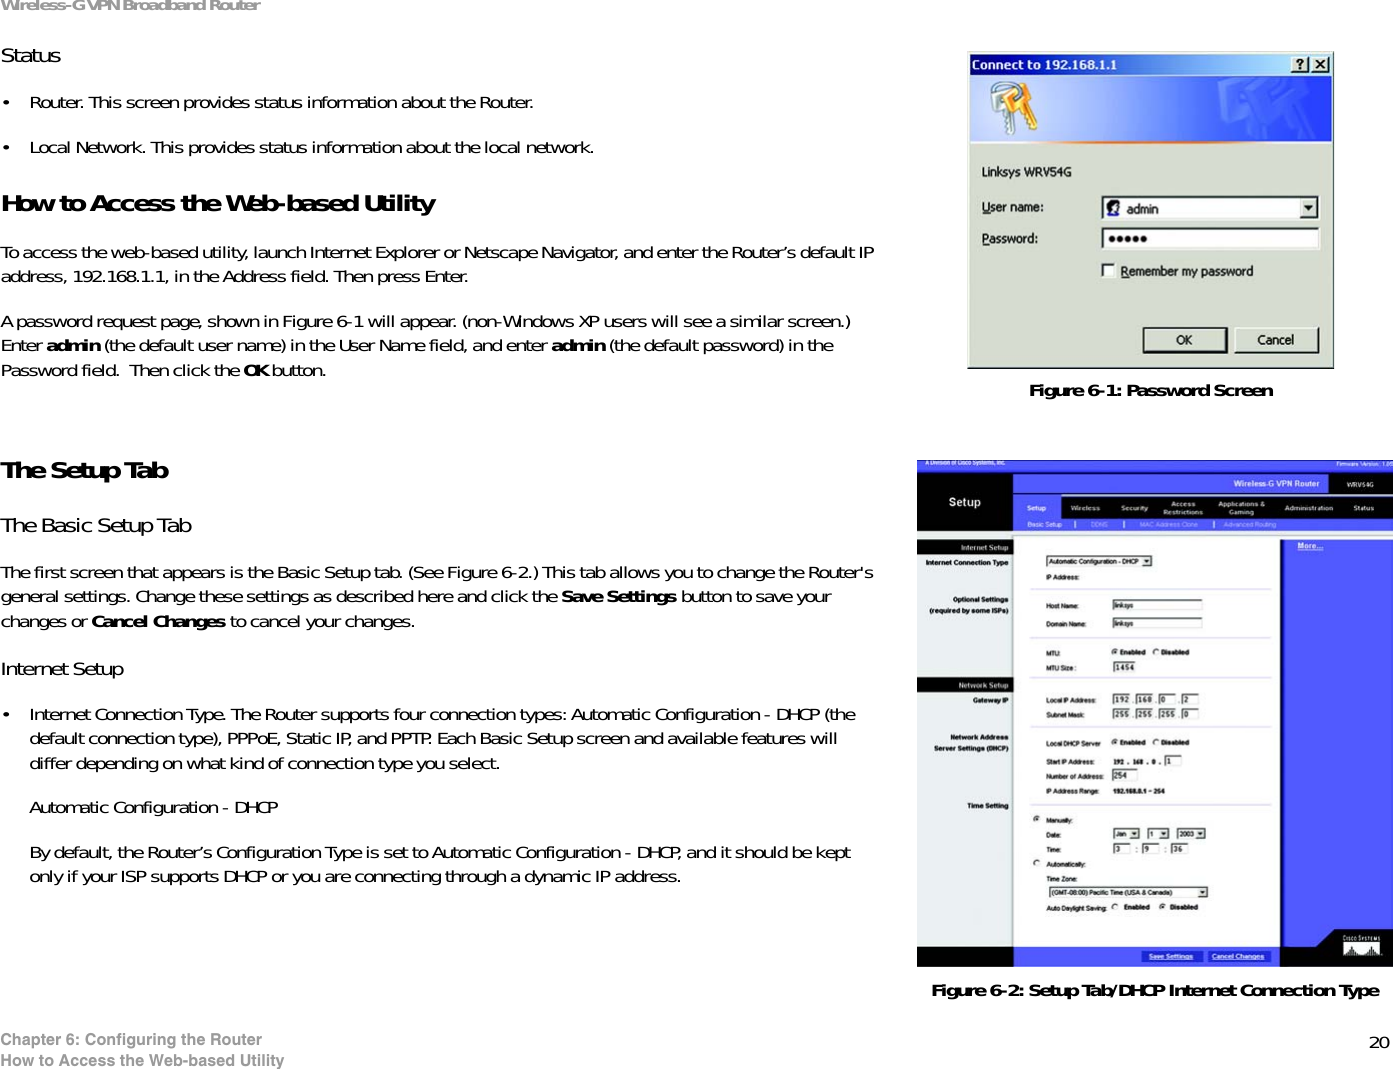 20Chapter 6: Configuring the RouterHow to Access the Web-based UtilityWireless-G VPN Broadband RouterStatus• Router. This screen provides status information about the Router.• Local Network. This provides status information about the local network.How to Access the Web-based UtilityTo access the web-based utility, launch Internet Explorer or Netscape Navigator, and enter the Router’s default IP address, 192.168.1.1, in the Address field. Then press Enter. A password request page, shown in Figure 6-1 will appear. (non-Windows XP users will see a similar screen.) Enter admin (the default user name) in the User Name field, and enter admin (the default password) in the Password field.  Then click the OK button. The Setup TabThe Basic Setup TabThe first screen that appears is the Basic Setup tab. (See Figure 6-2.) This tab allows you to change the Router&apos;s general settings. Change these settings as described here and click the Save Settings button to save your changes or Cancel Changes to cancel your changes.Internet Setup• Internet Connection Type. The Router supports four connection types: Automatic Configuration - DHCP (the default connection type), PPPoE, Static IP, and PPTP. Each Basic Setup screen and available features will differ depending on what kind of connection type you select.Automatic Configuration - DHCP By default, the Router’s Configuration Type is set to Automatic Configuration - DHCP, and it should be kept only if your ISP supports DHCP or you are connecting through a dynamic IP address.Figure 6-2: Setup Tab/DHCP Internet Connection TypeFigure 6-1: Password Screen